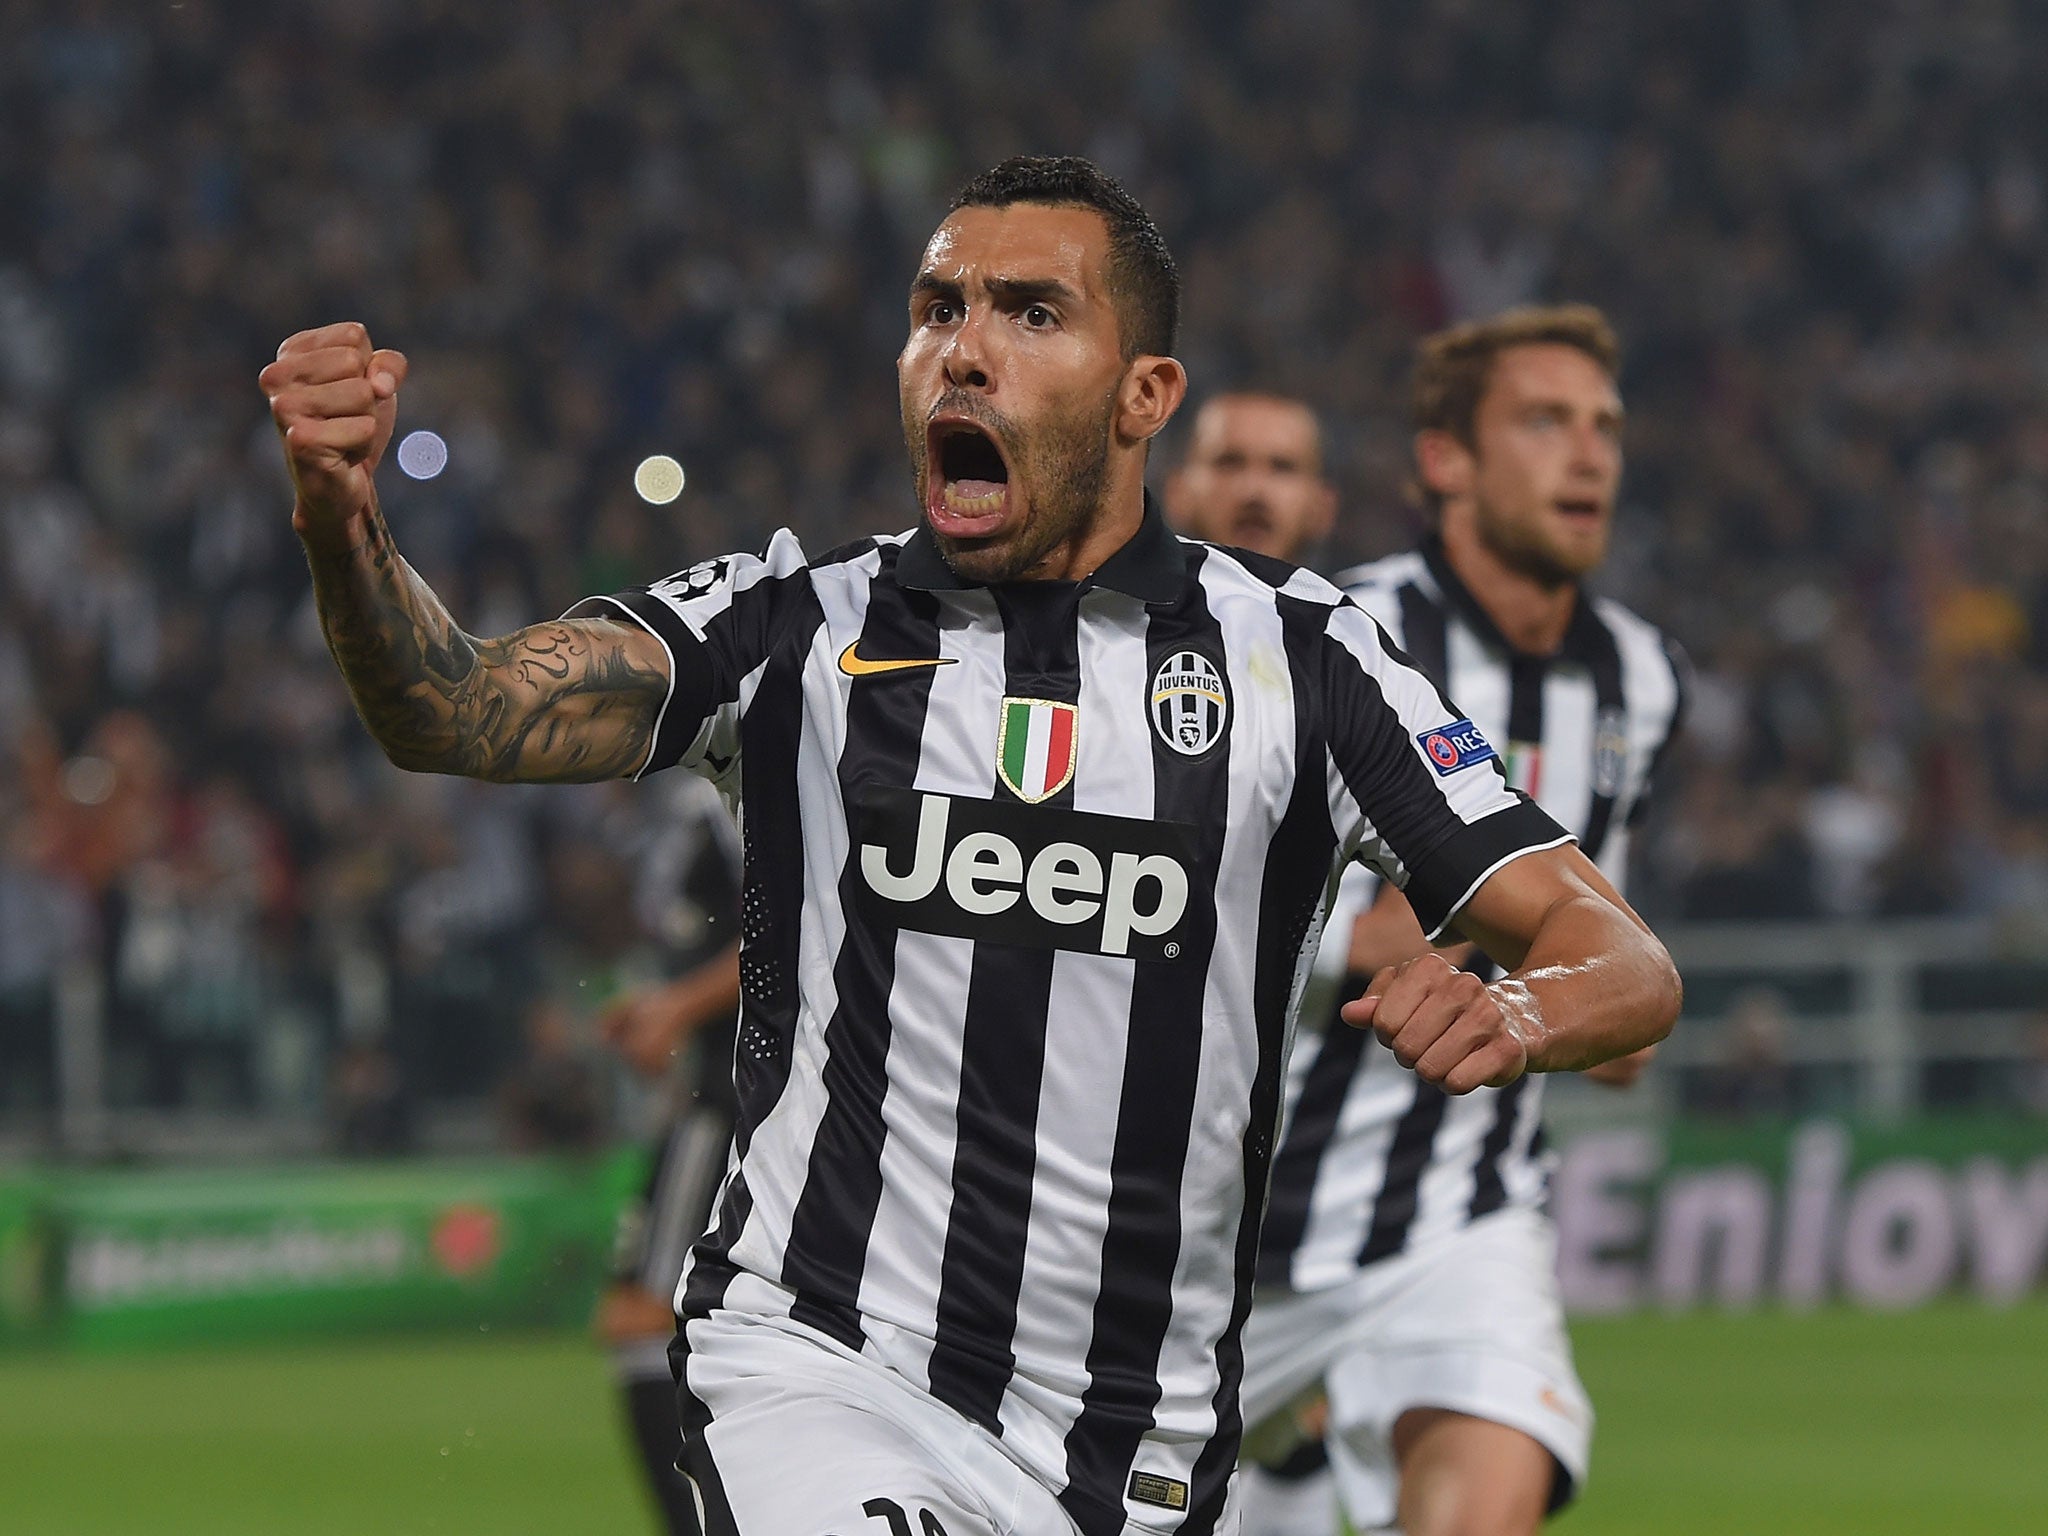 Carlos Tevez celebrates scoring against Real Madrid in the first leg